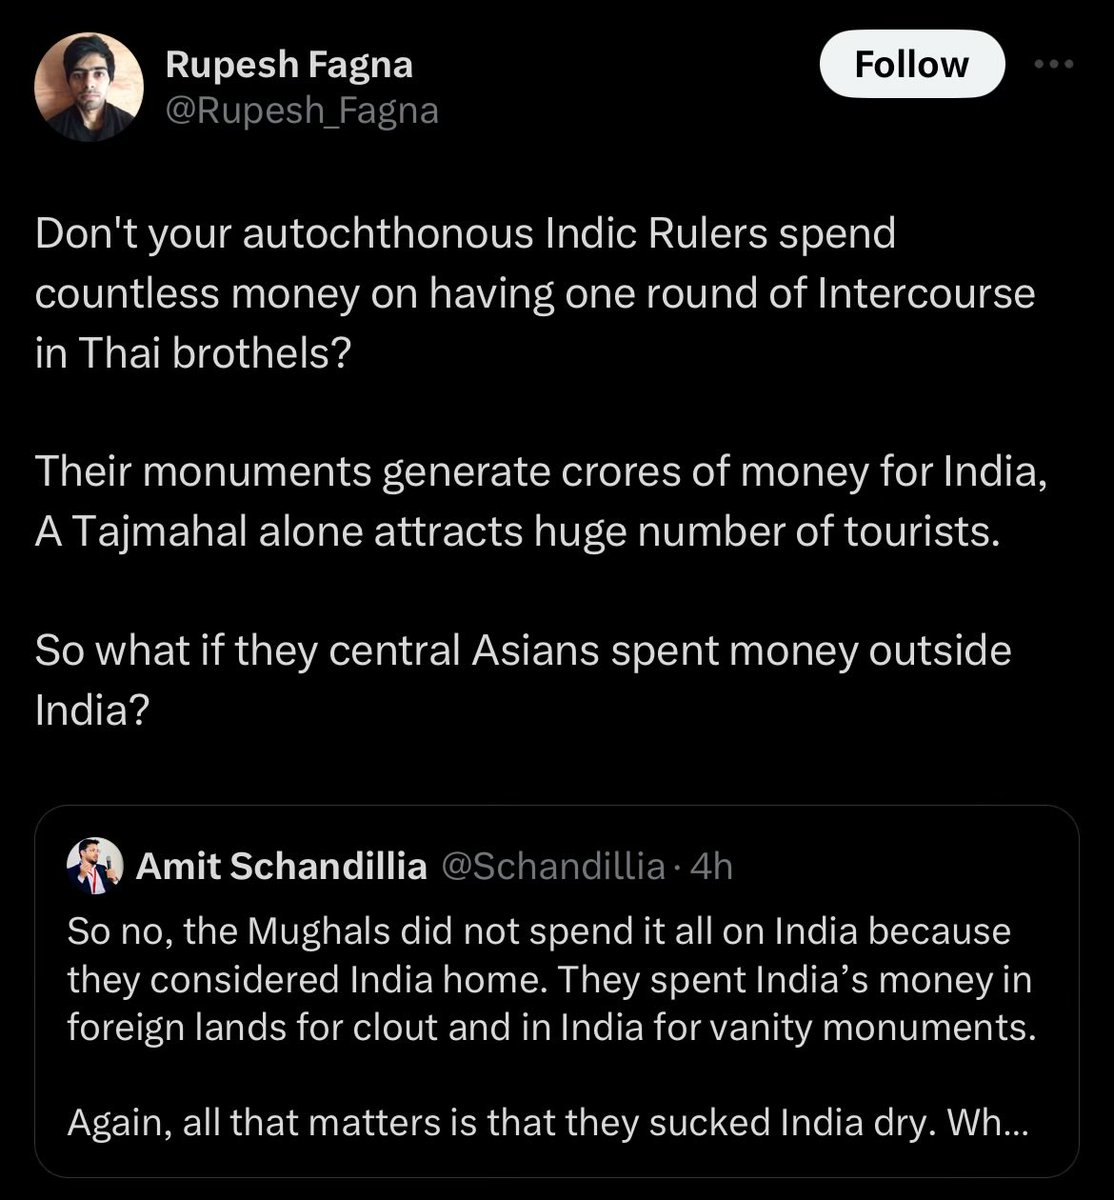 Another myth that refuses to die. First of all, Taj Mahal is no Mughal charity. Indians literally died starving to fund this shameless extravaganza. As for revenues, with a 400-yr vintage it brought about ₹100 cr in 2019. A 5-yr old Statue of Unity alone made 82 cr that year.